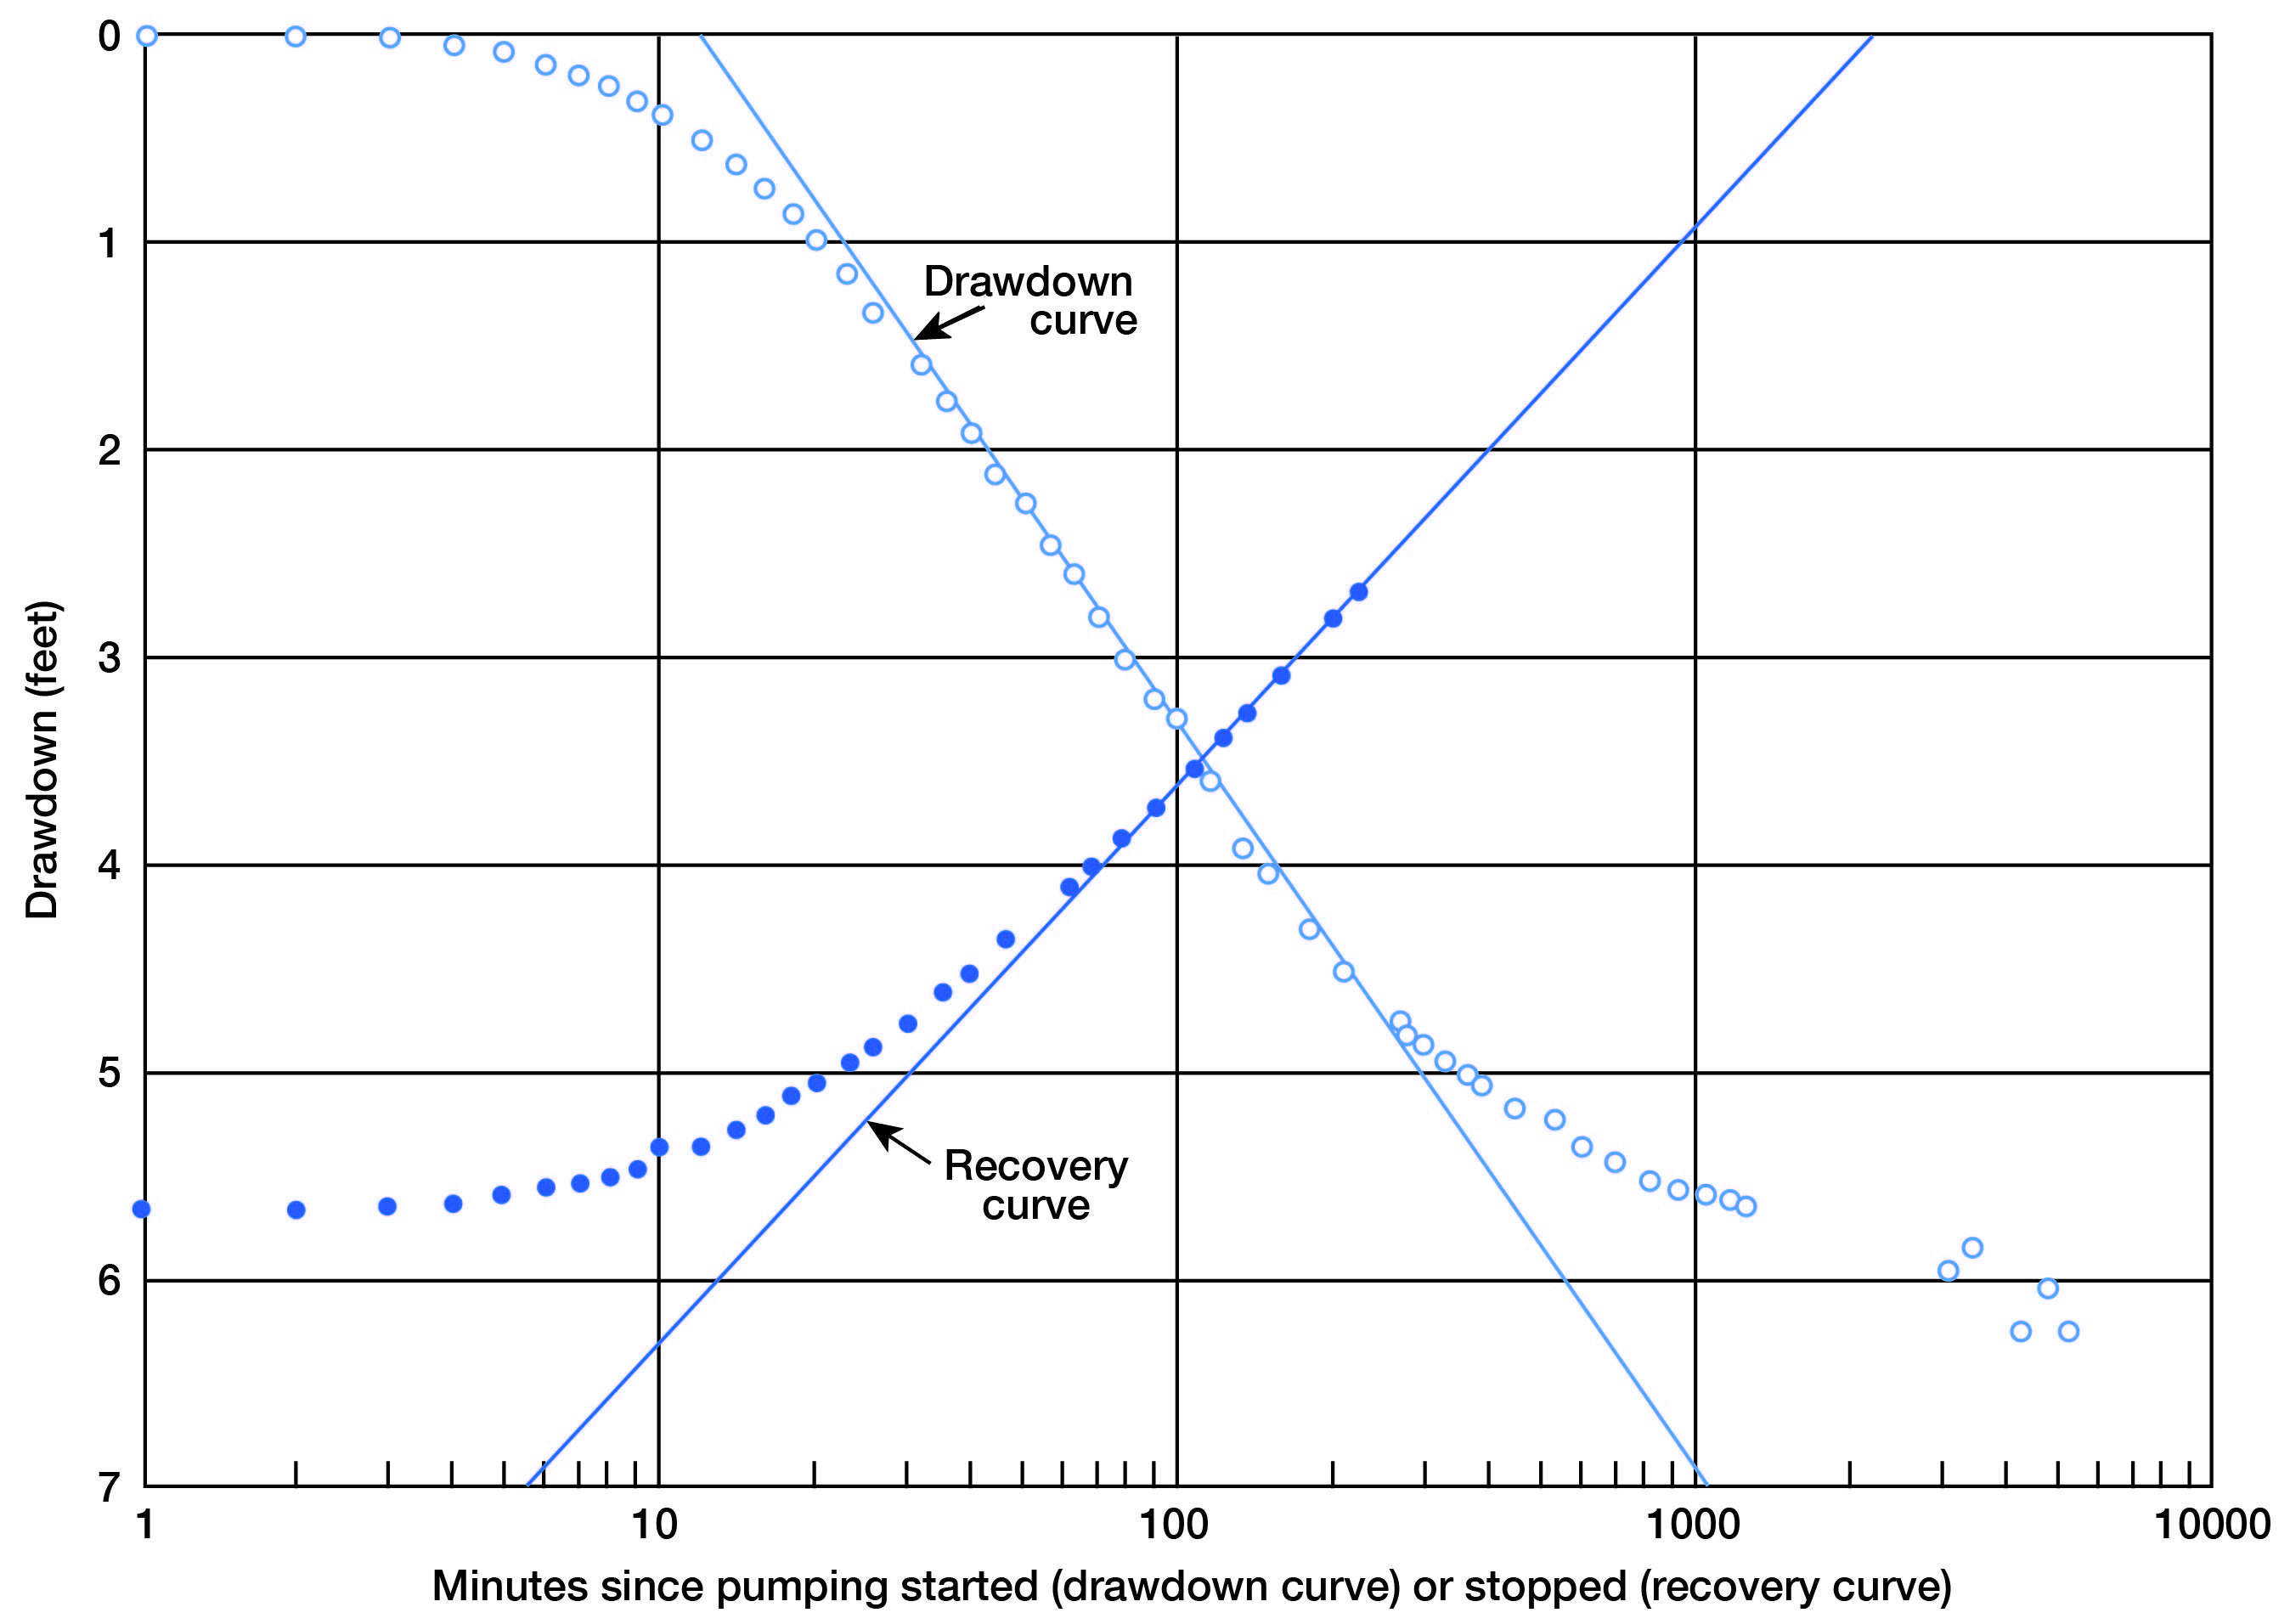 Recovery curve plotted against log(time) straightens only after 70 minutes; drawdown curve straightens after 11 minutes, is straight until 110 minutes.